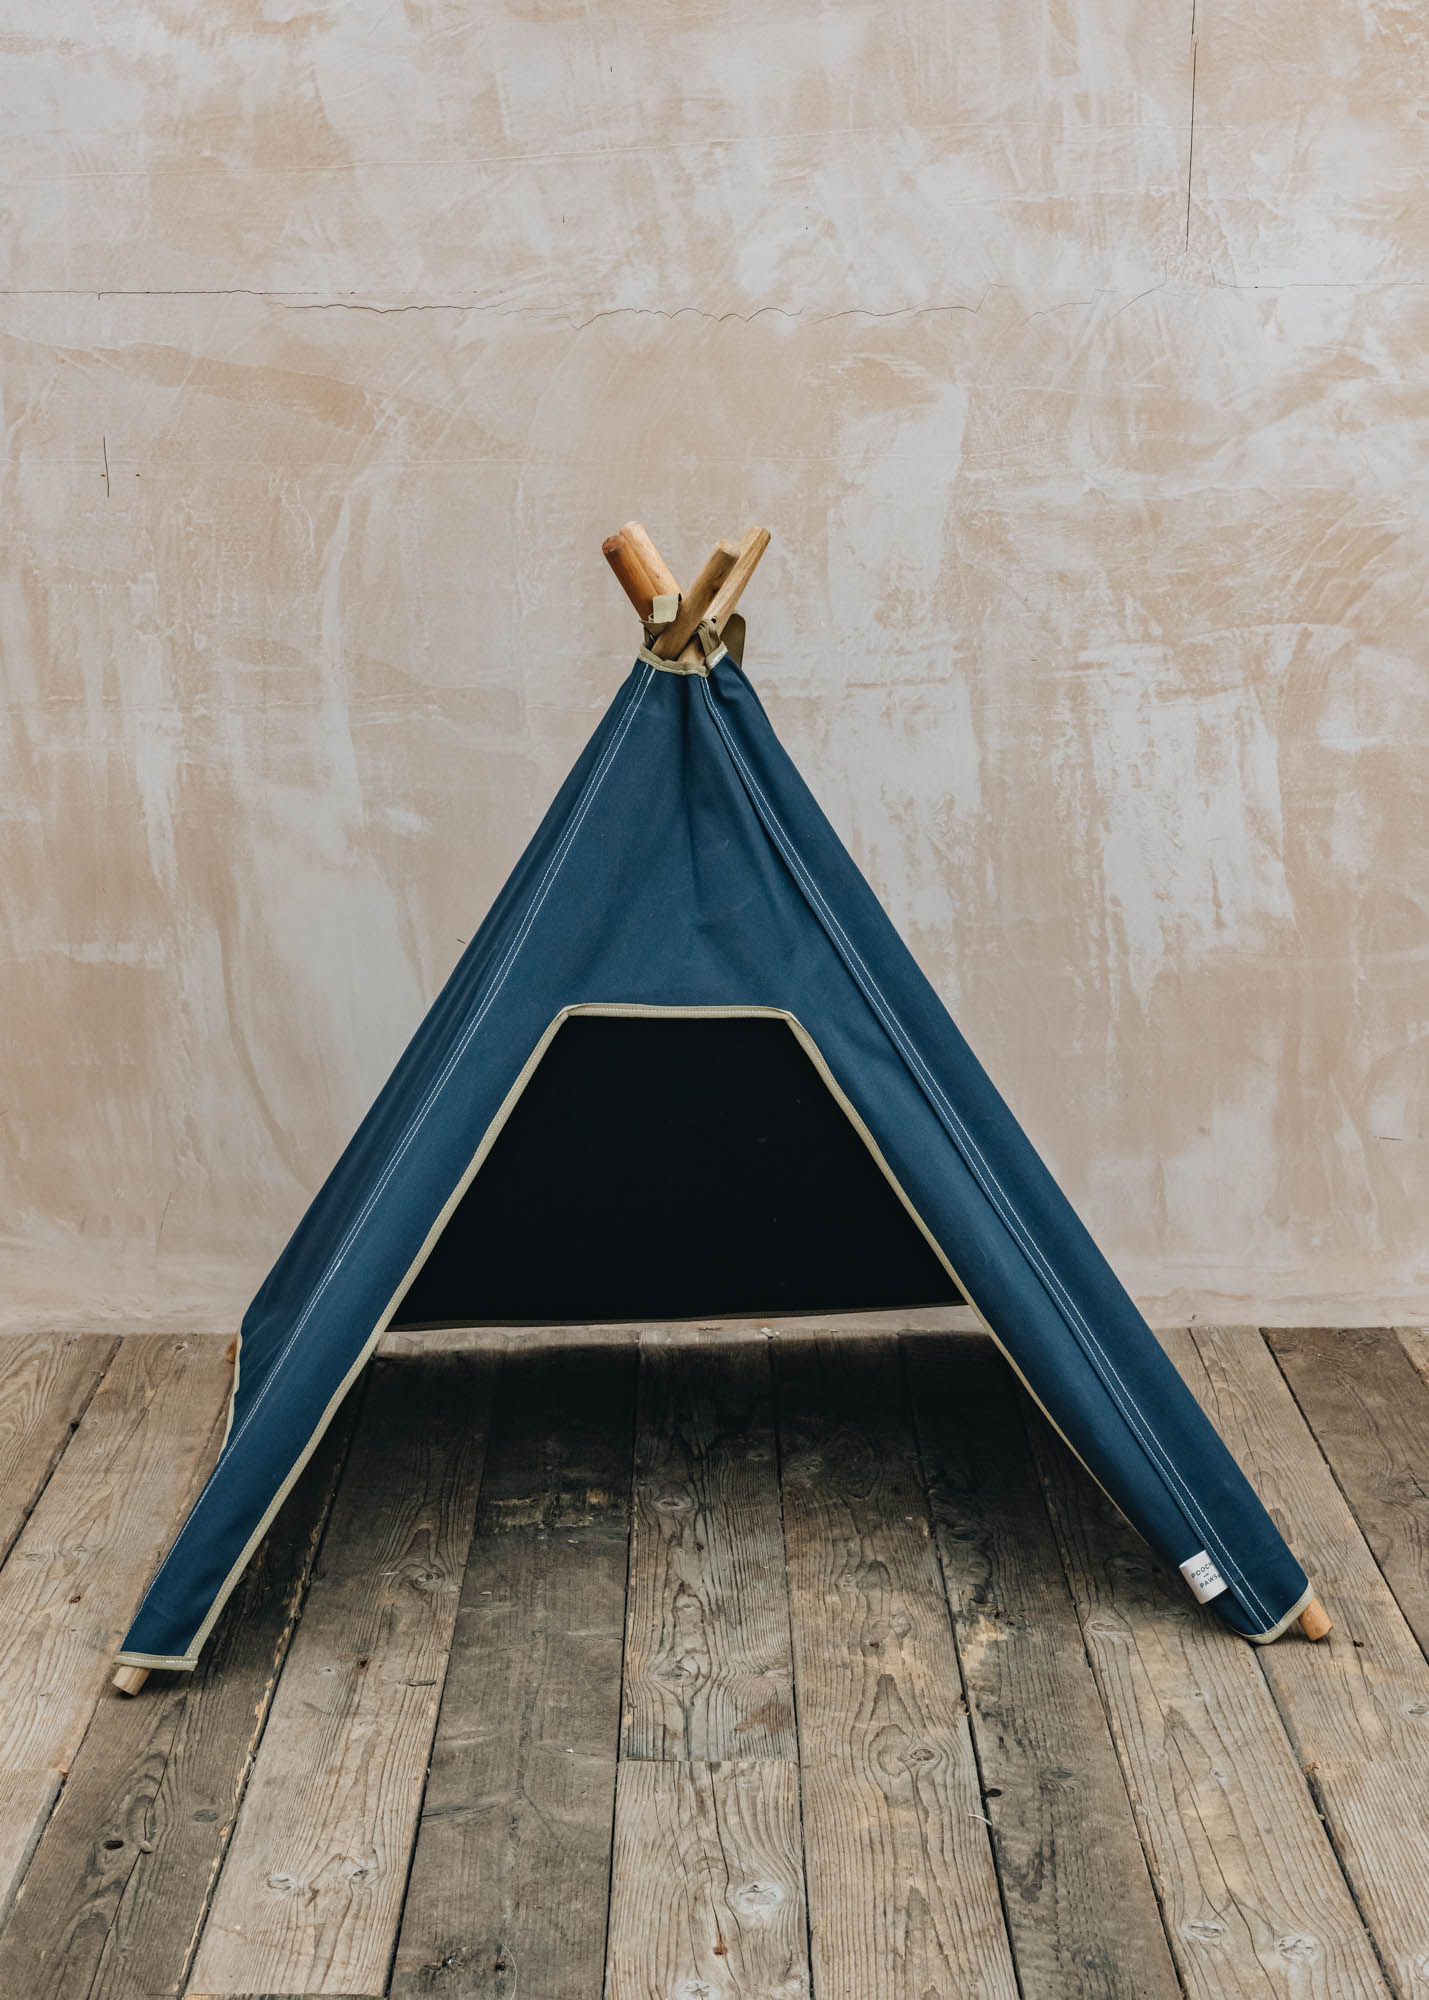 Pooch & Paws Large Pet Teepee in Navy Blue